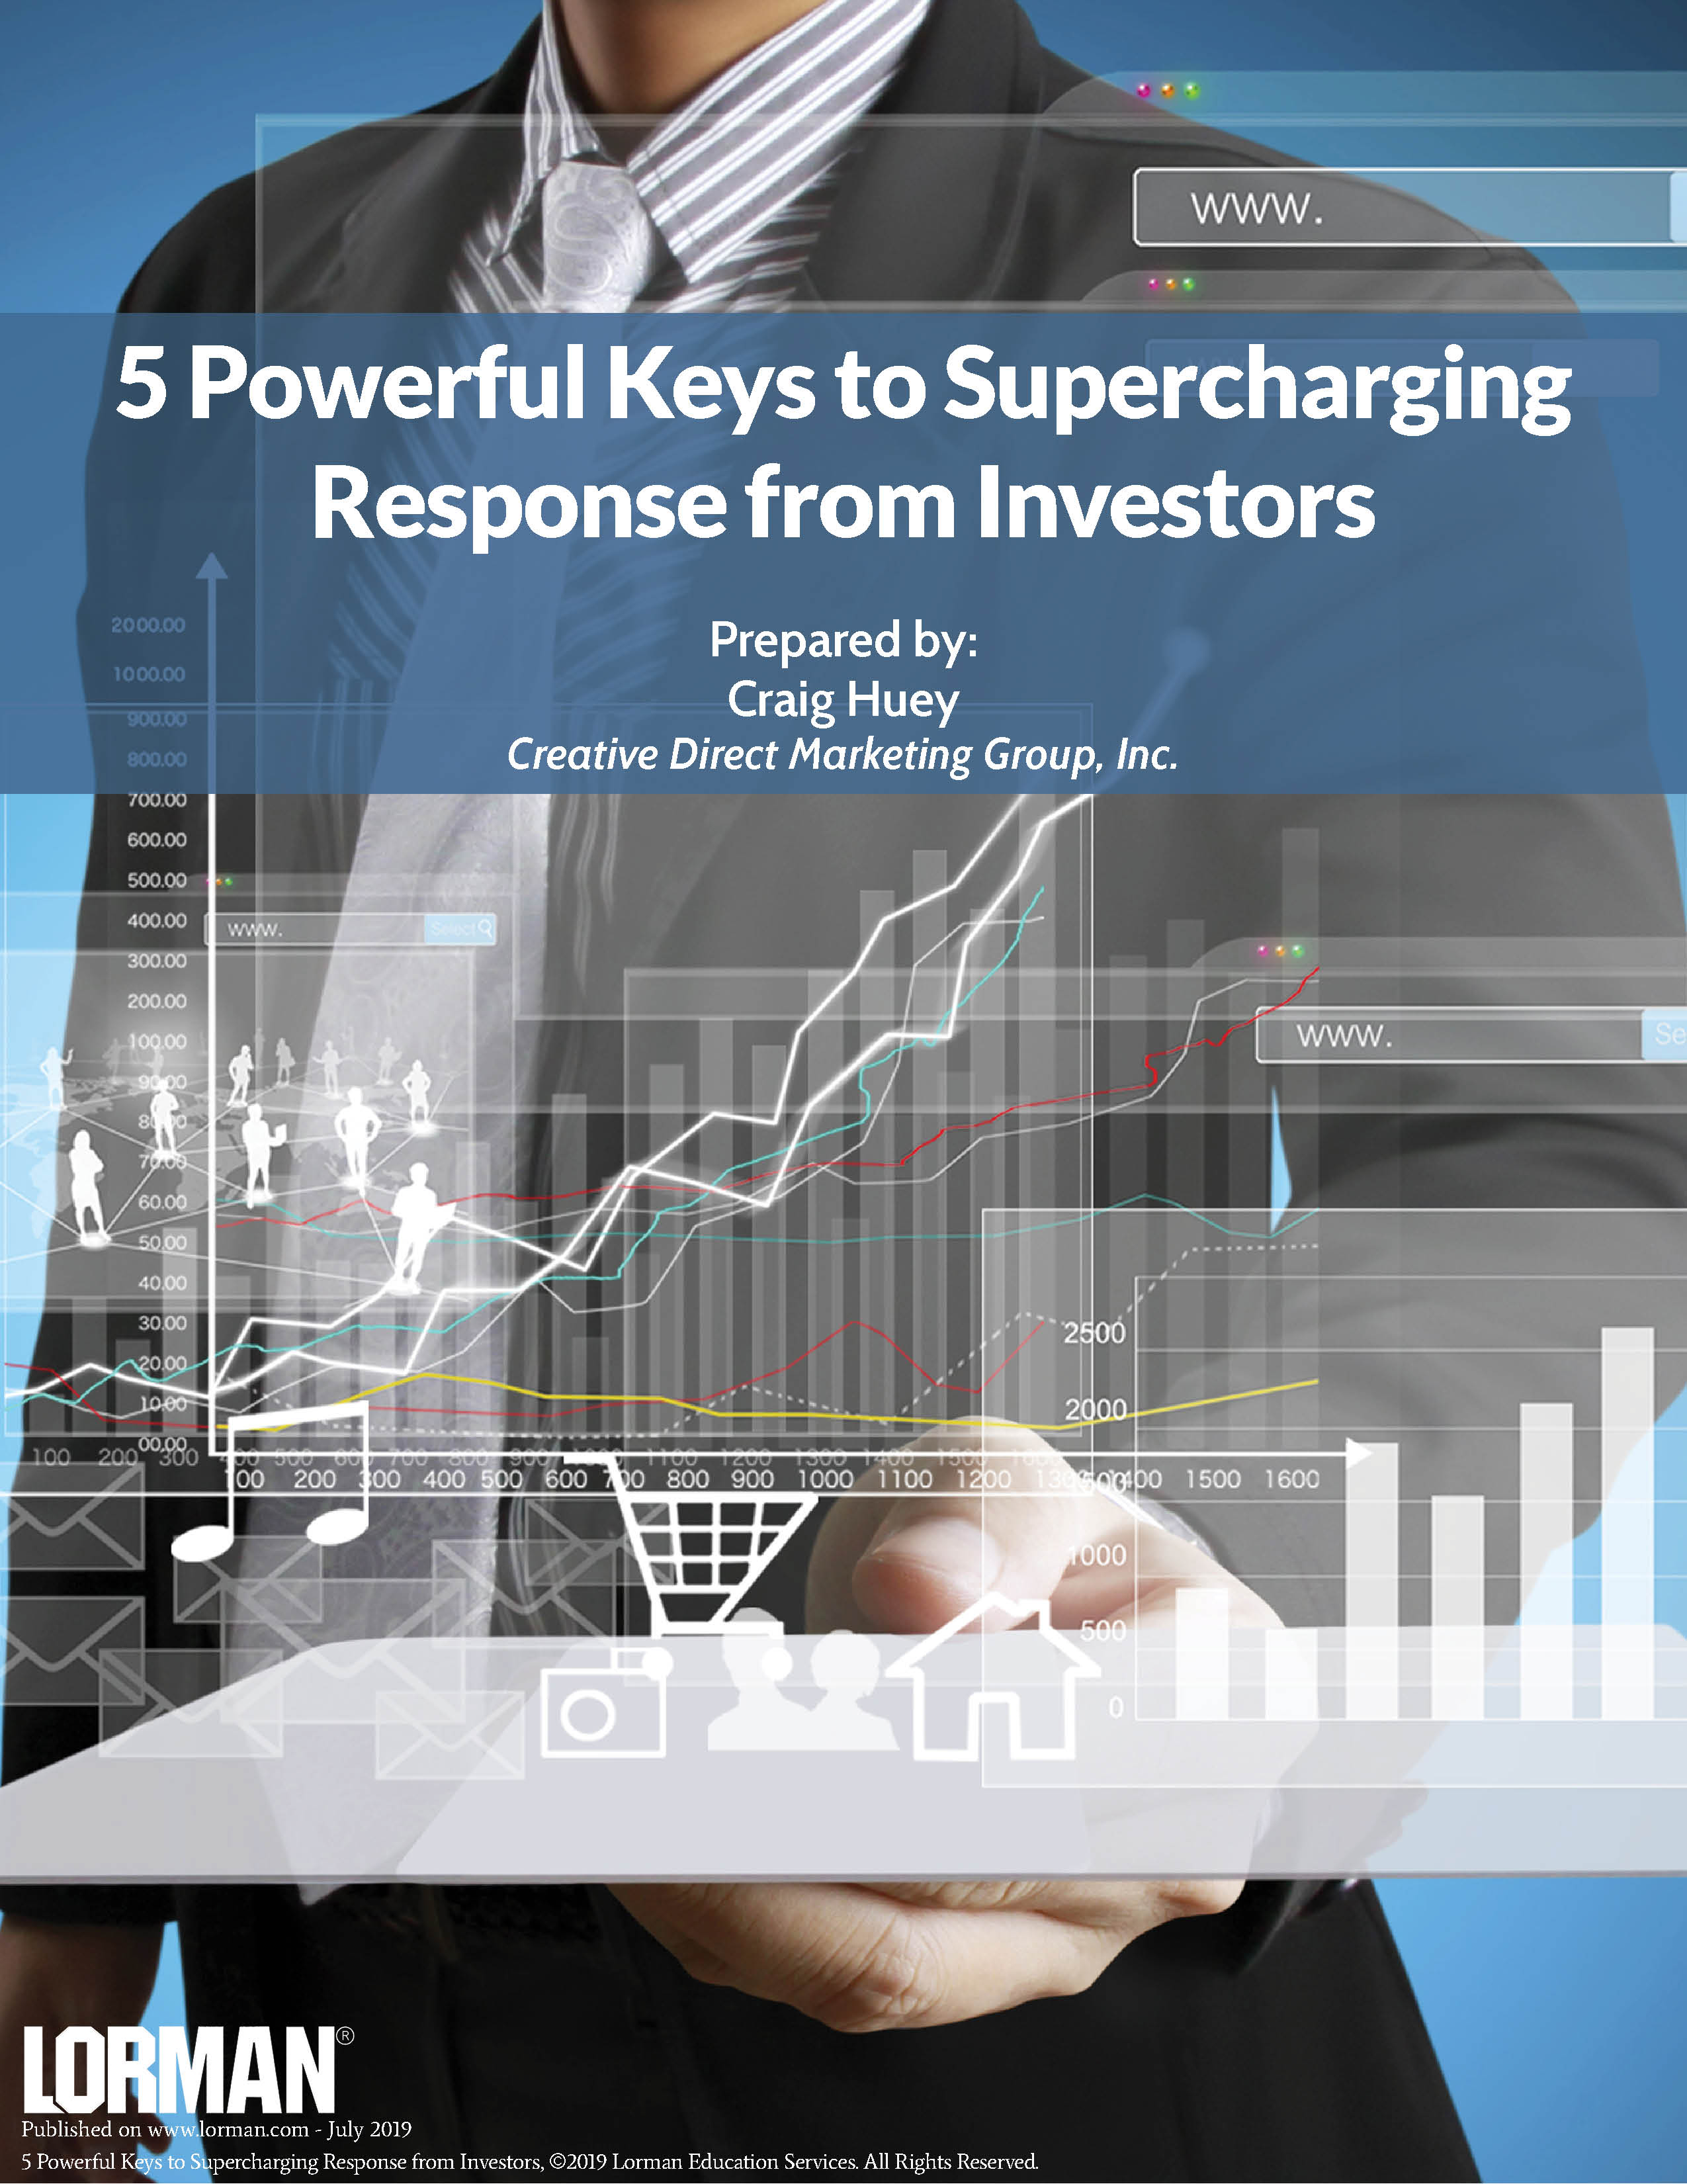 5 Powerful Keys to Supercharging Response from Investors